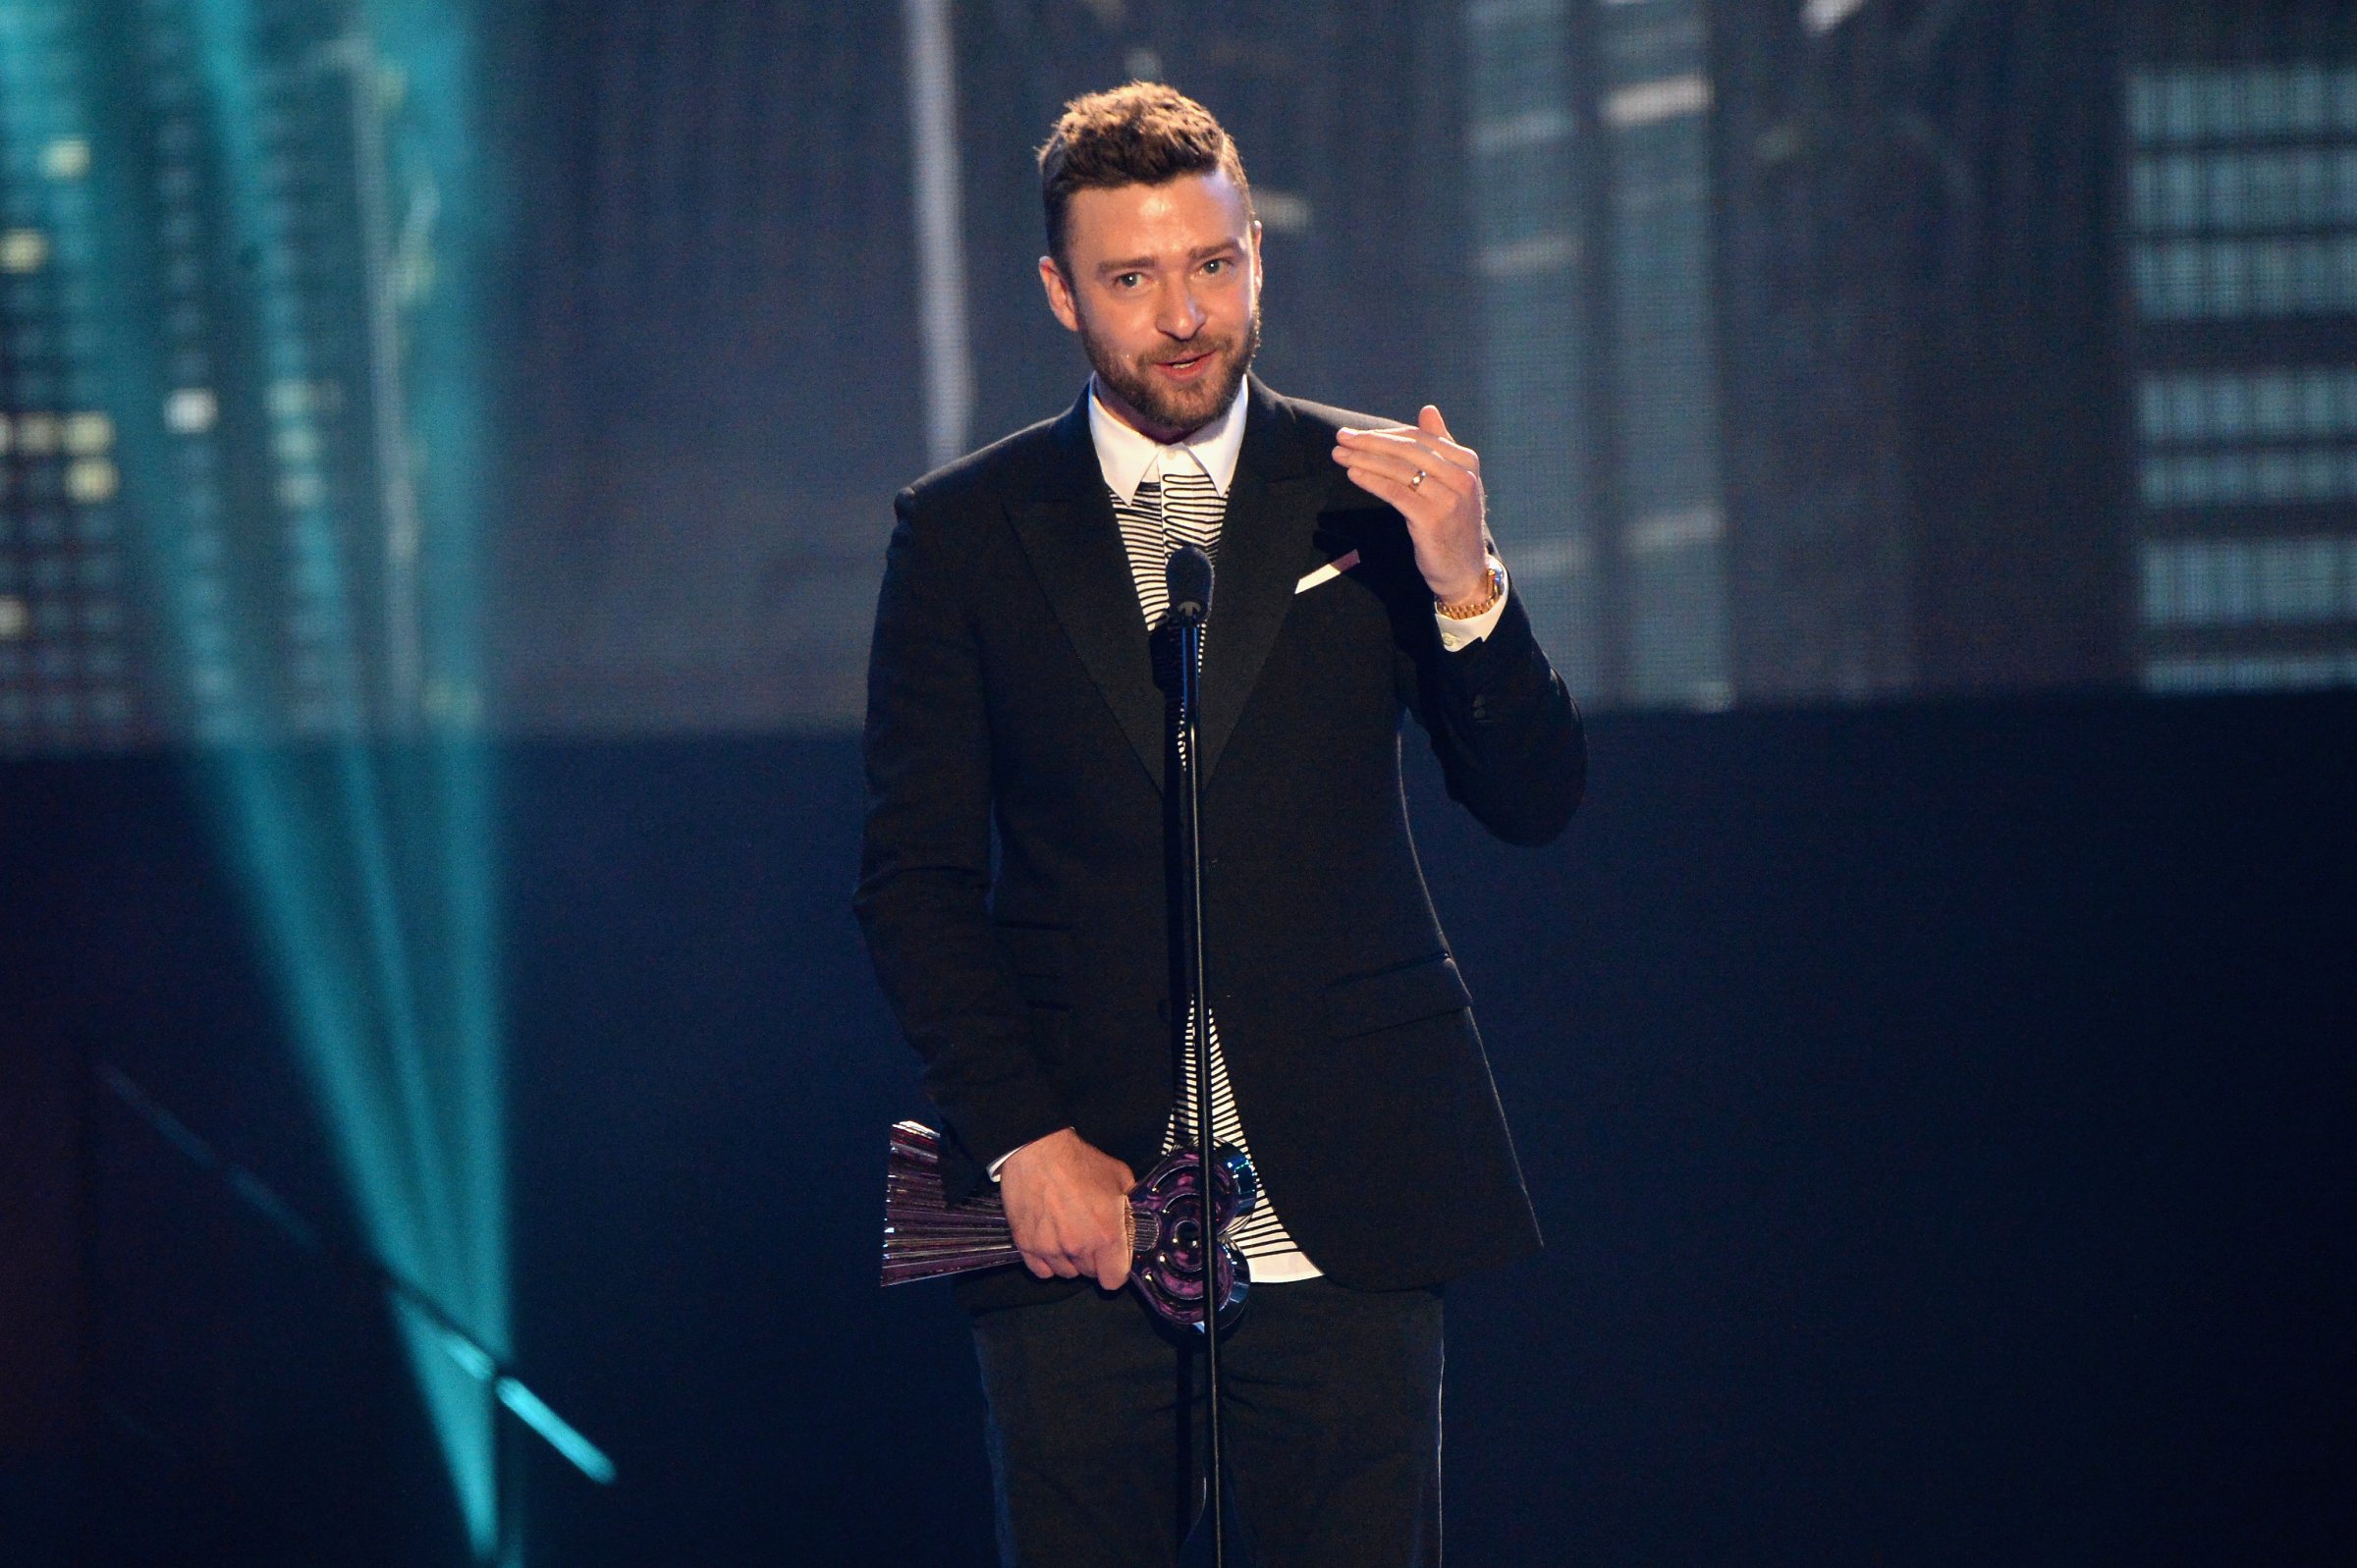 Singer Justin Timberlake performs onstage at the iHeartRadio Music Awards which broadcasted live on TBS, TNT, AND TRUTV from The Forum on April 3, 2016 in Inglewood, California.